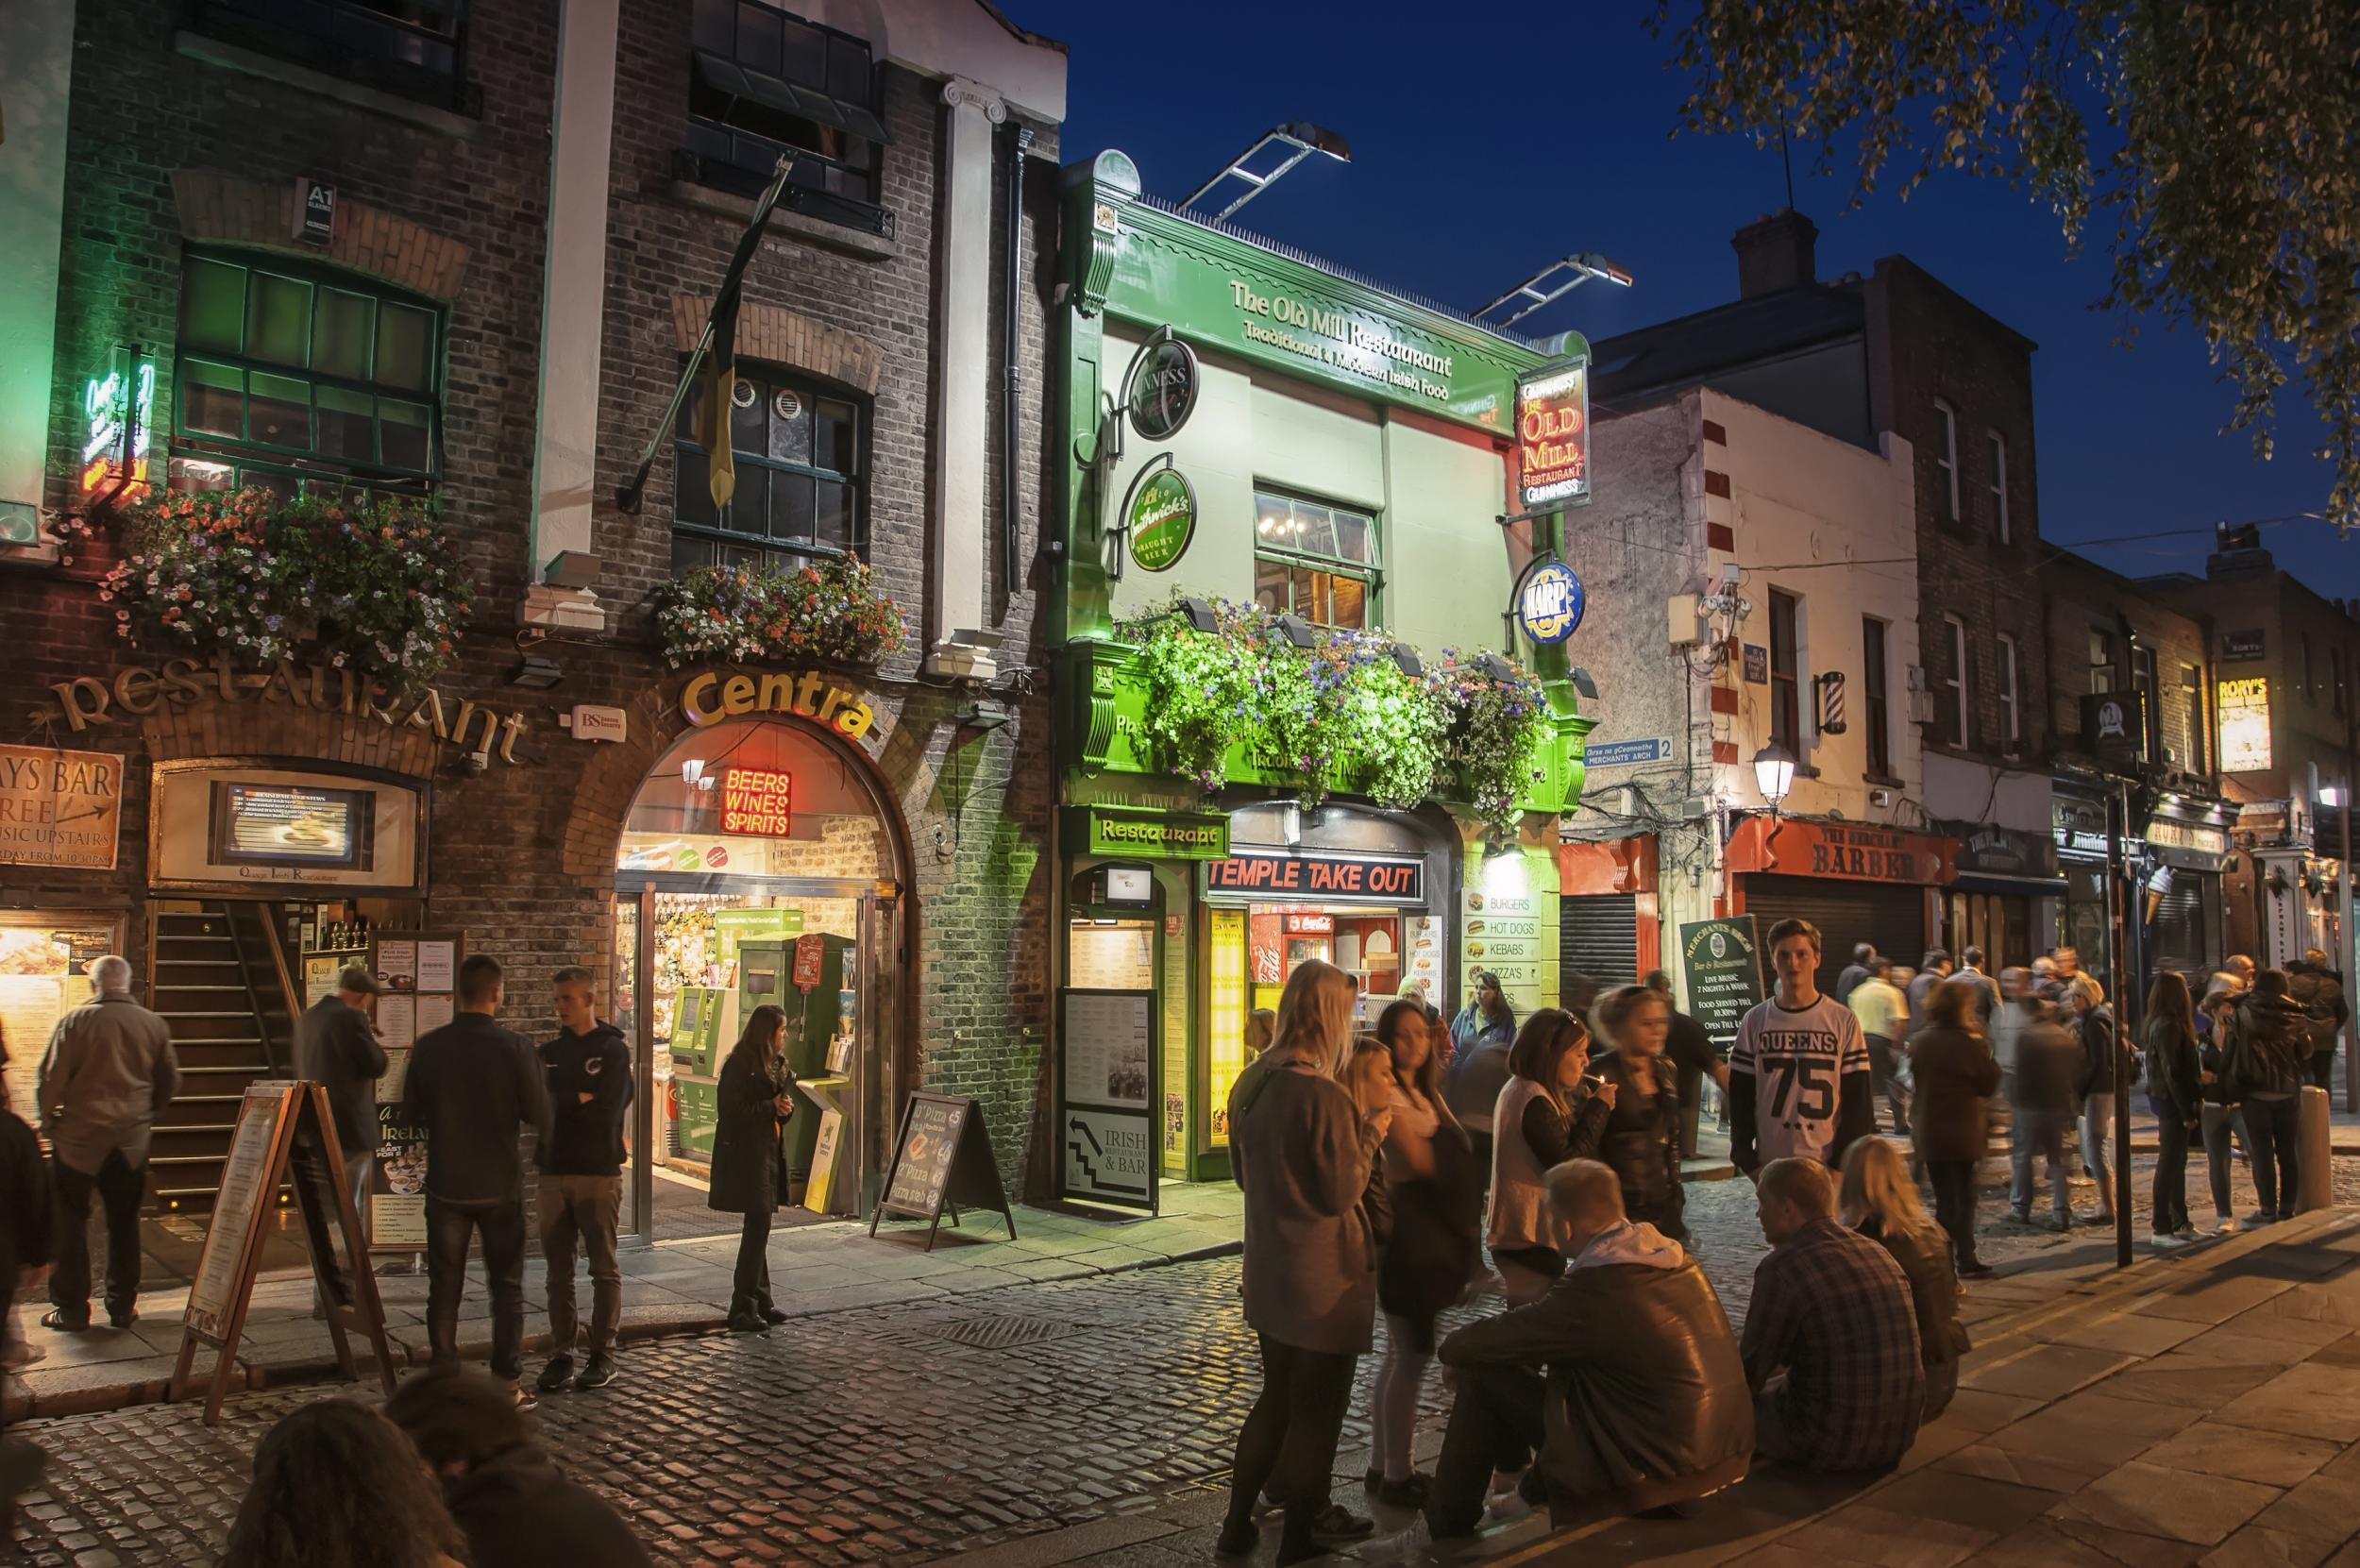 Dublin was rated highly in the report Shutterstock/Madrugada Verde